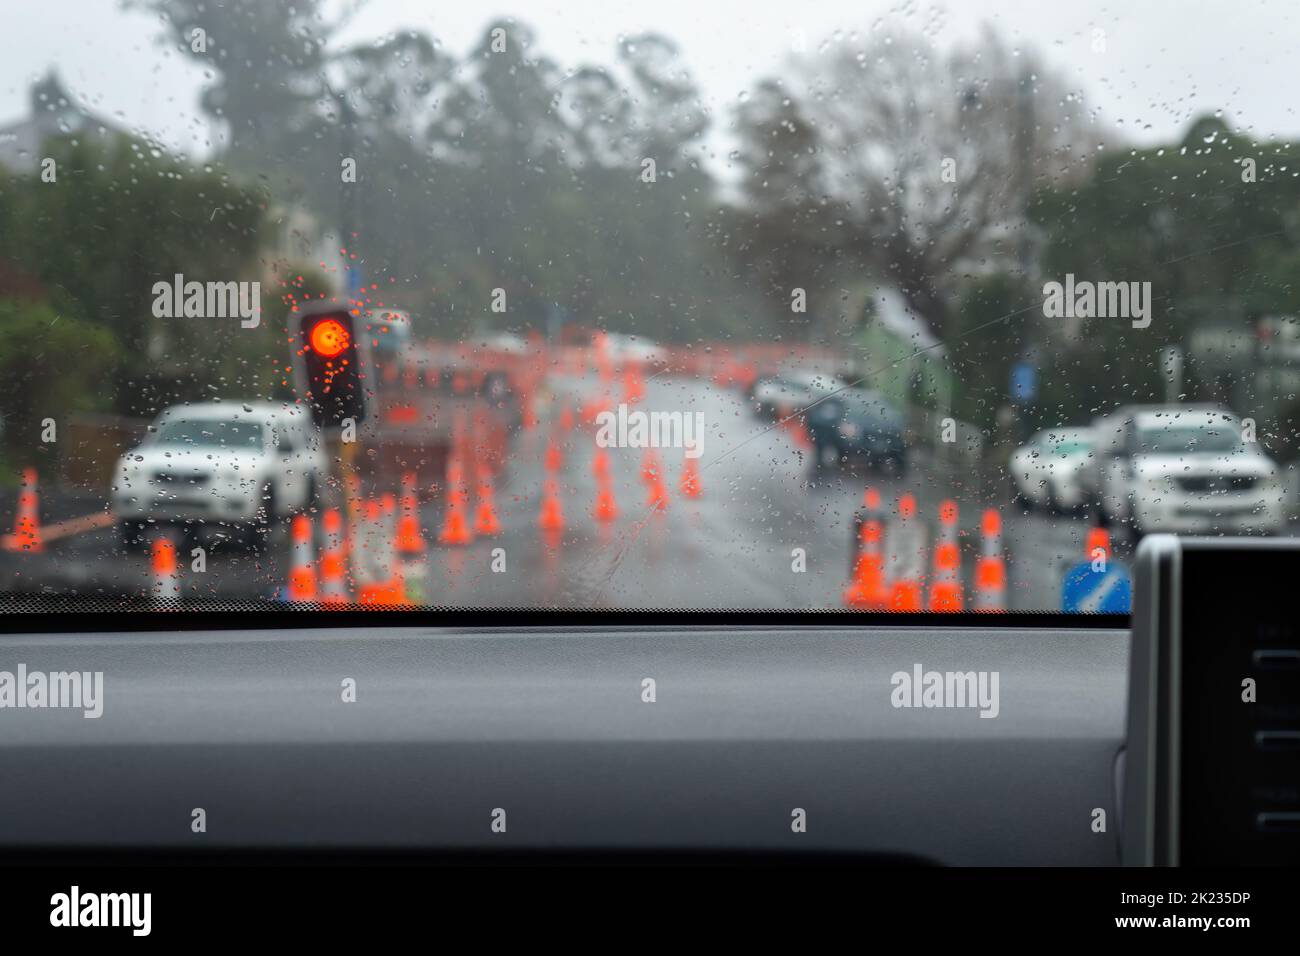 Car waiting on traffic light stopped by roadwork. Blurred traffic cones lined up road. Dunedin, New Zealand. Stock Photo